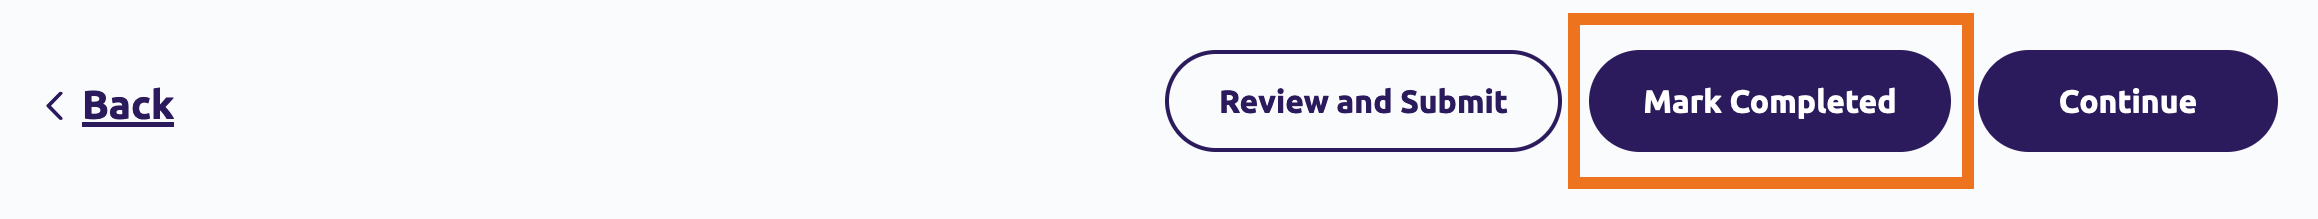 Mark as Completed button, displayed between buttons for Review and Submit and Continue